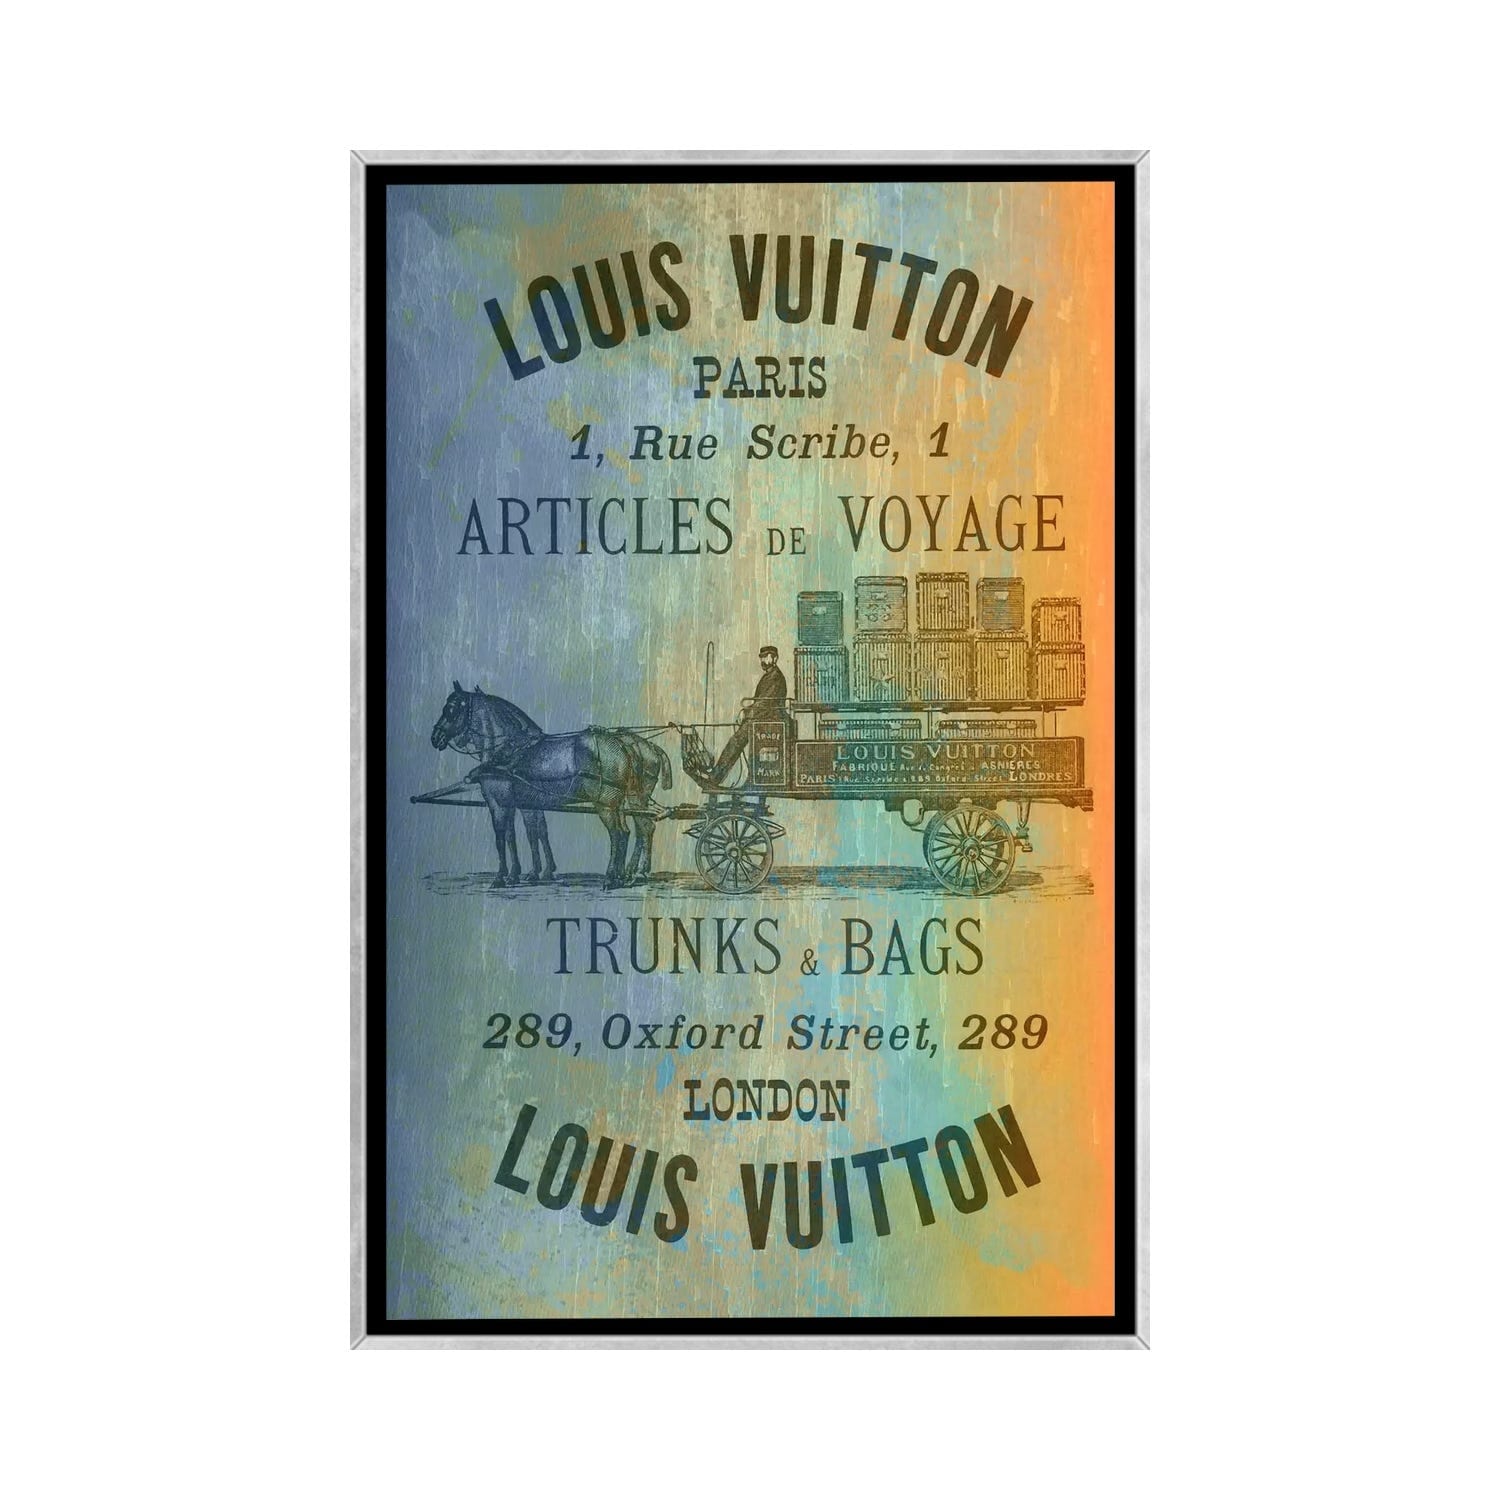 Framed Canvas Art - Vintage Woodgrain Louis Vuitton Sign 2 by 5by5collective ( Fashion > Historical Fashion art) - 26x18 in